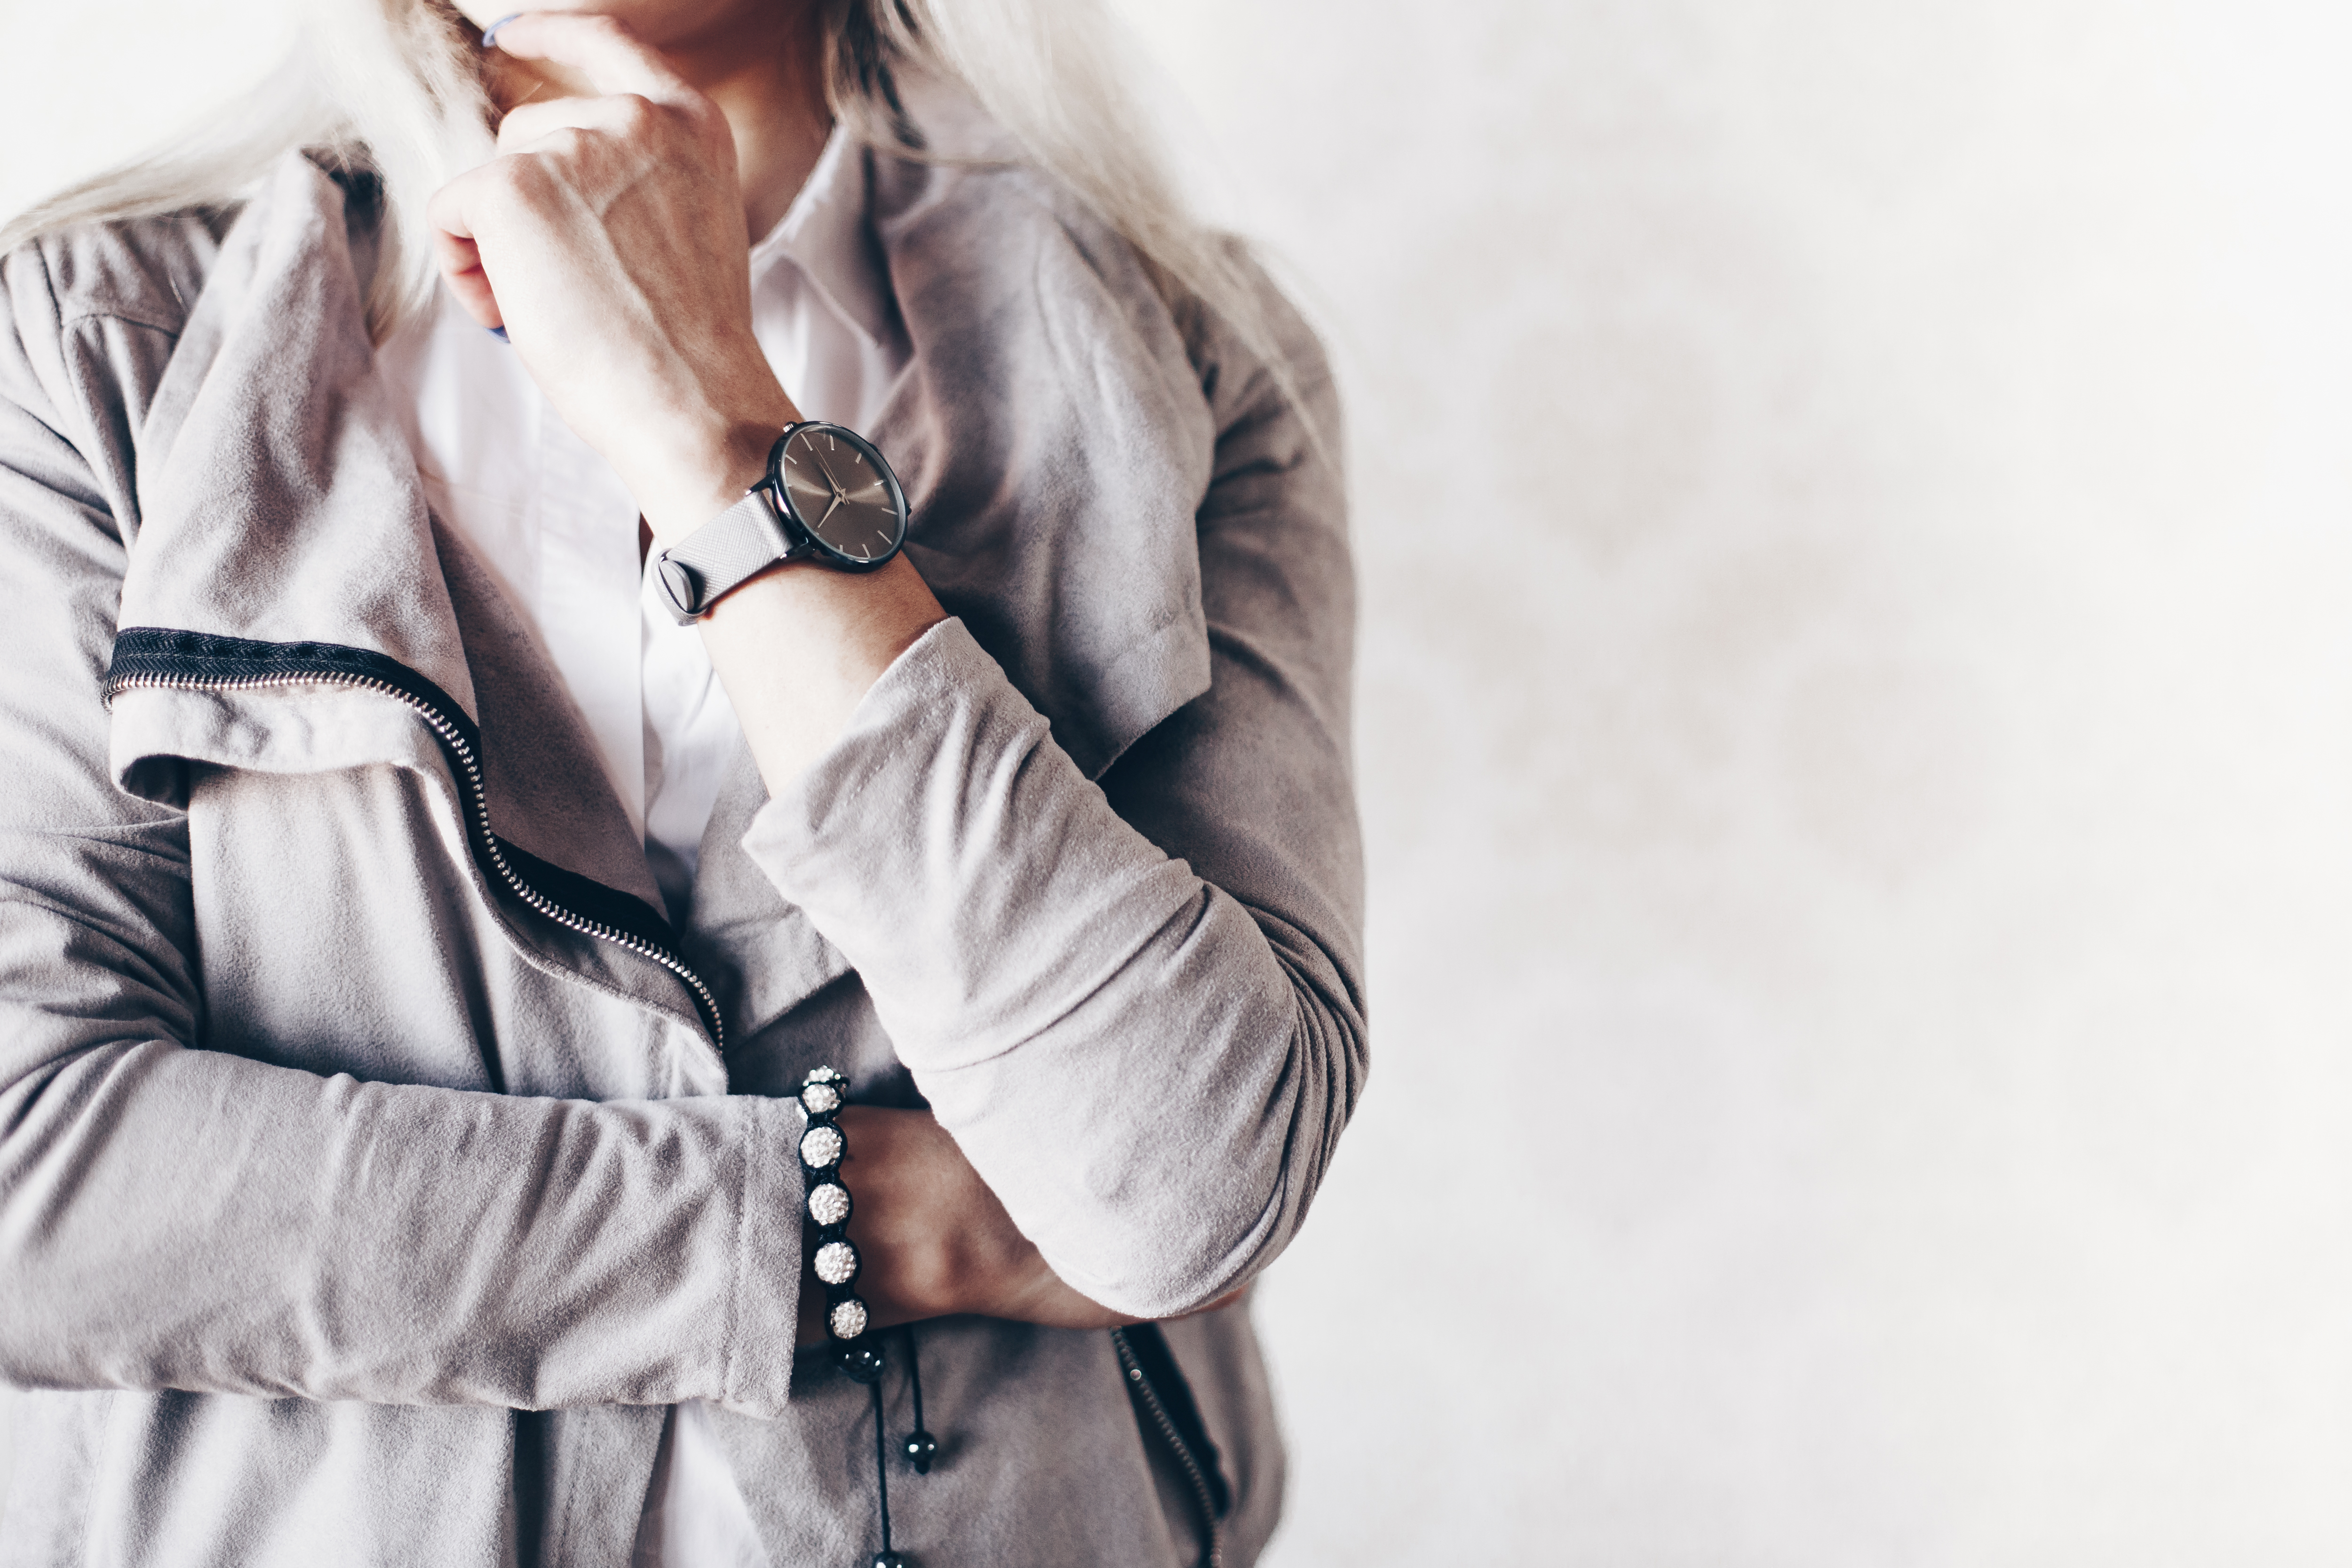 Girl Fashion Pose with Gray Watches and Suede Jacket #2 Free Stock Photo |  picjumbo